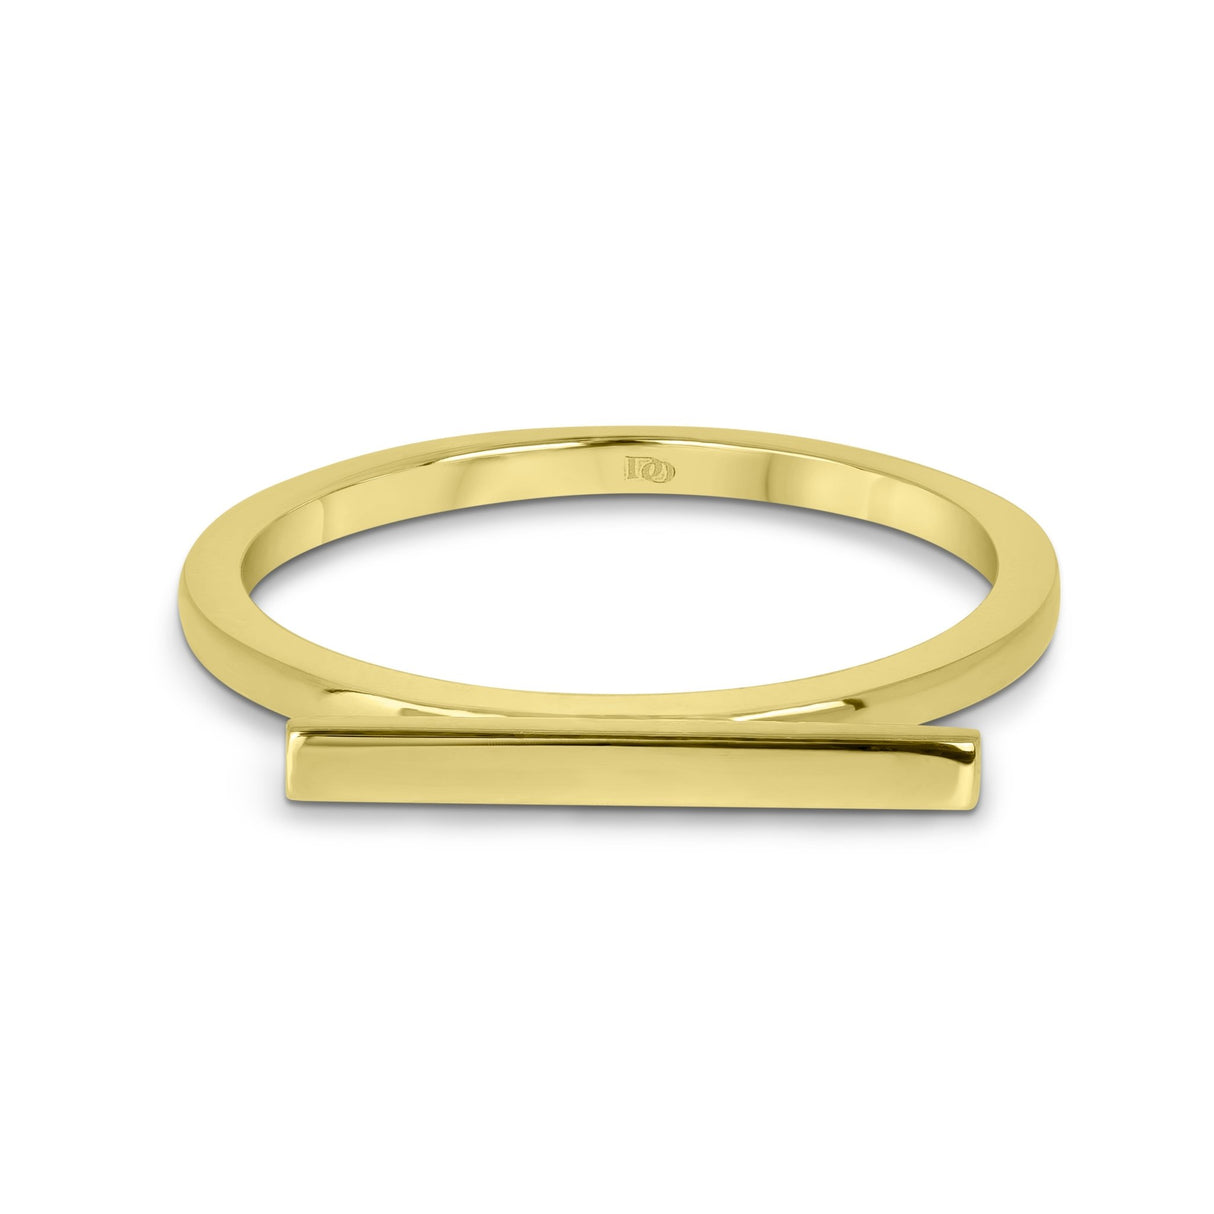 An exquisite 2mm golden ring with a horizontal bar design, reflecting the perfect fusion of contemporary fashion and meaningful symbolism, gold ring, gold rings, stackable ring, stackable rings, 14K gold stackable ring, 14K gold stackable rings, diamond origin, 